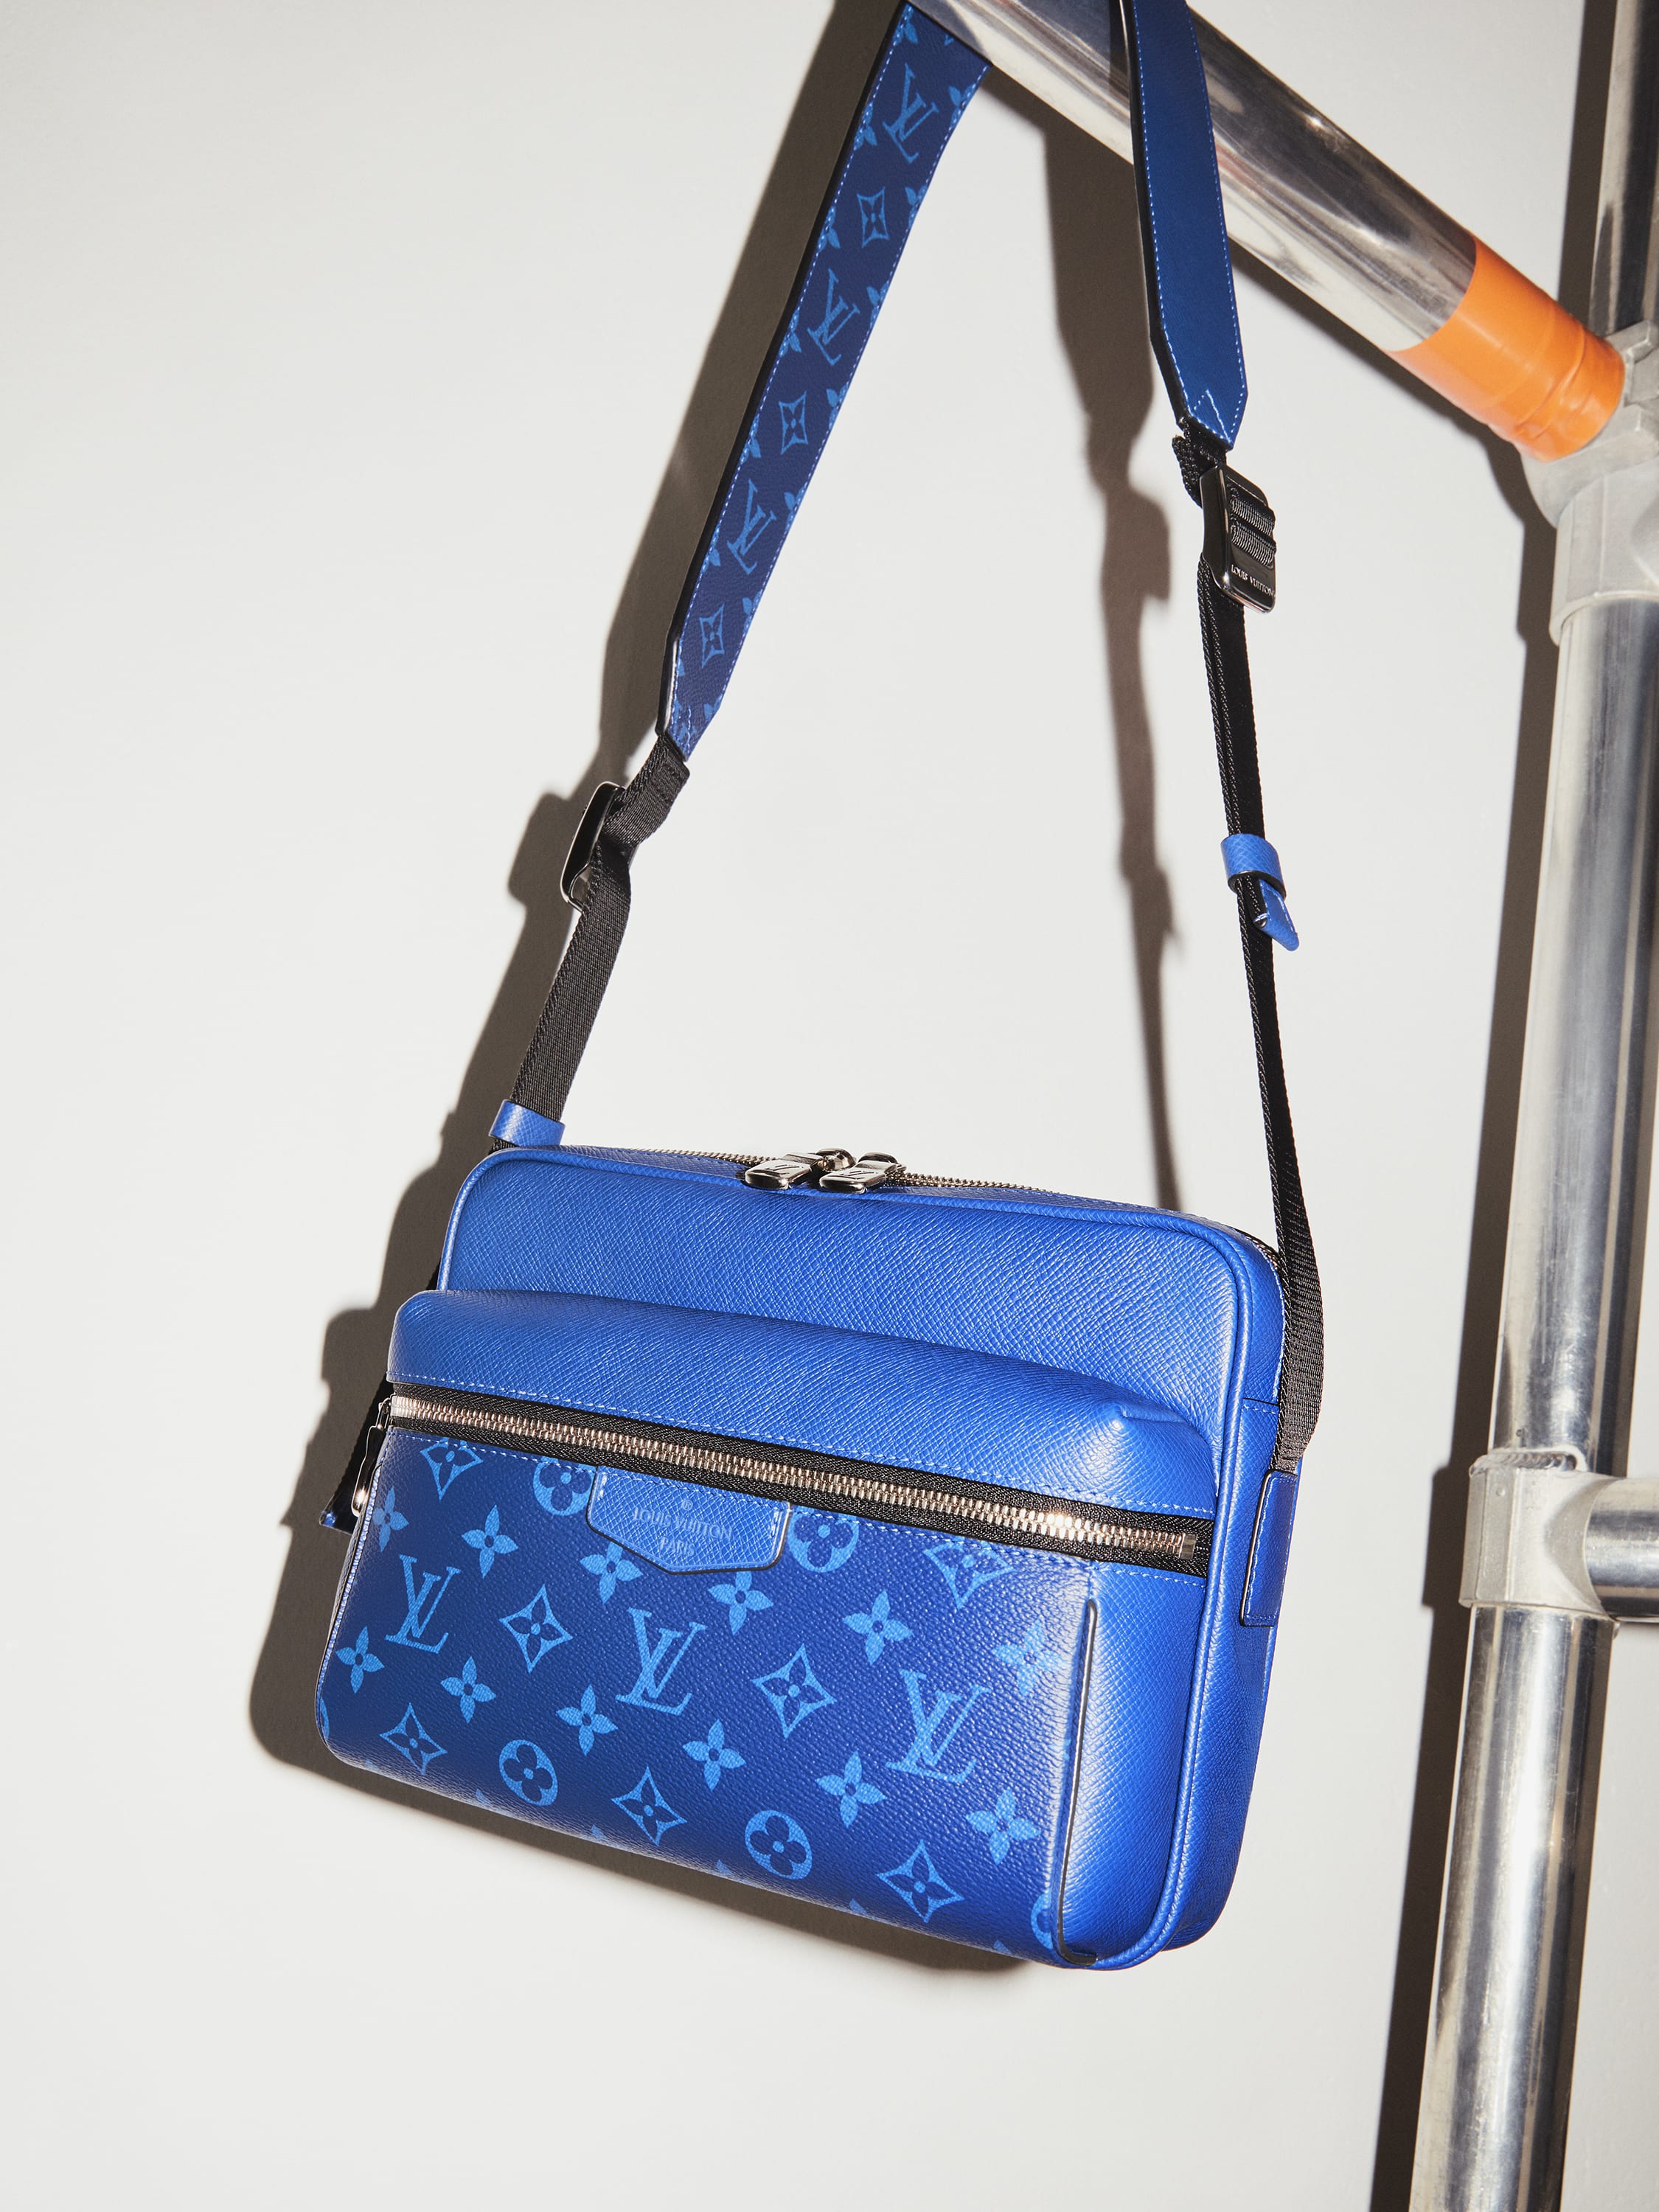 Louis Vuitton Expands Taigarama Collection with New Styles and